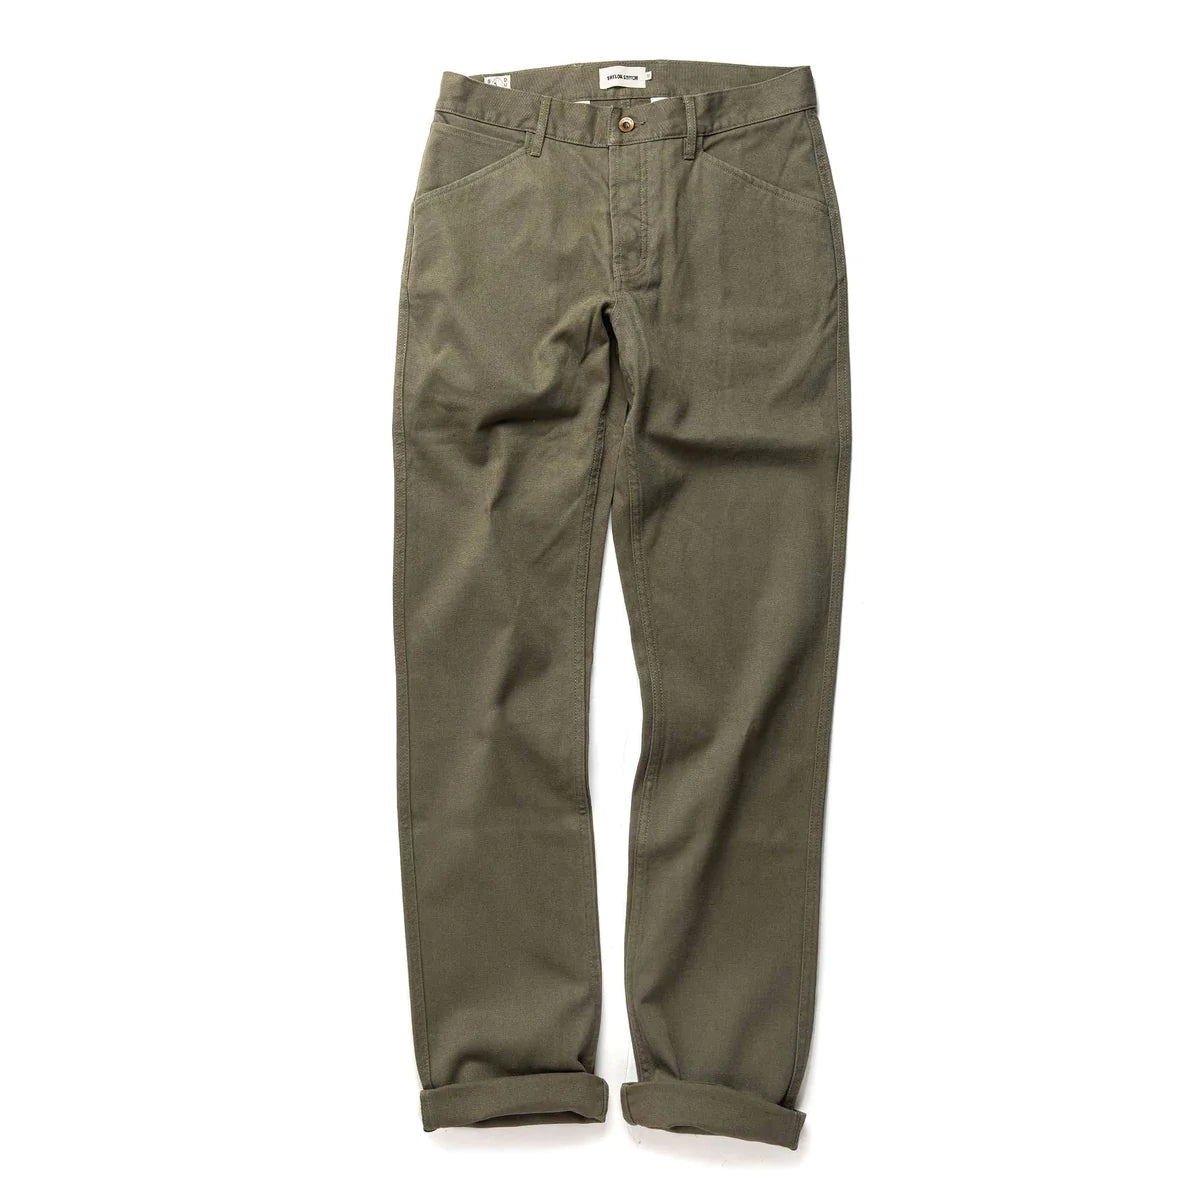 TAYLOR STITCH THE CAMP PANT IN STONE BOSS DUCK